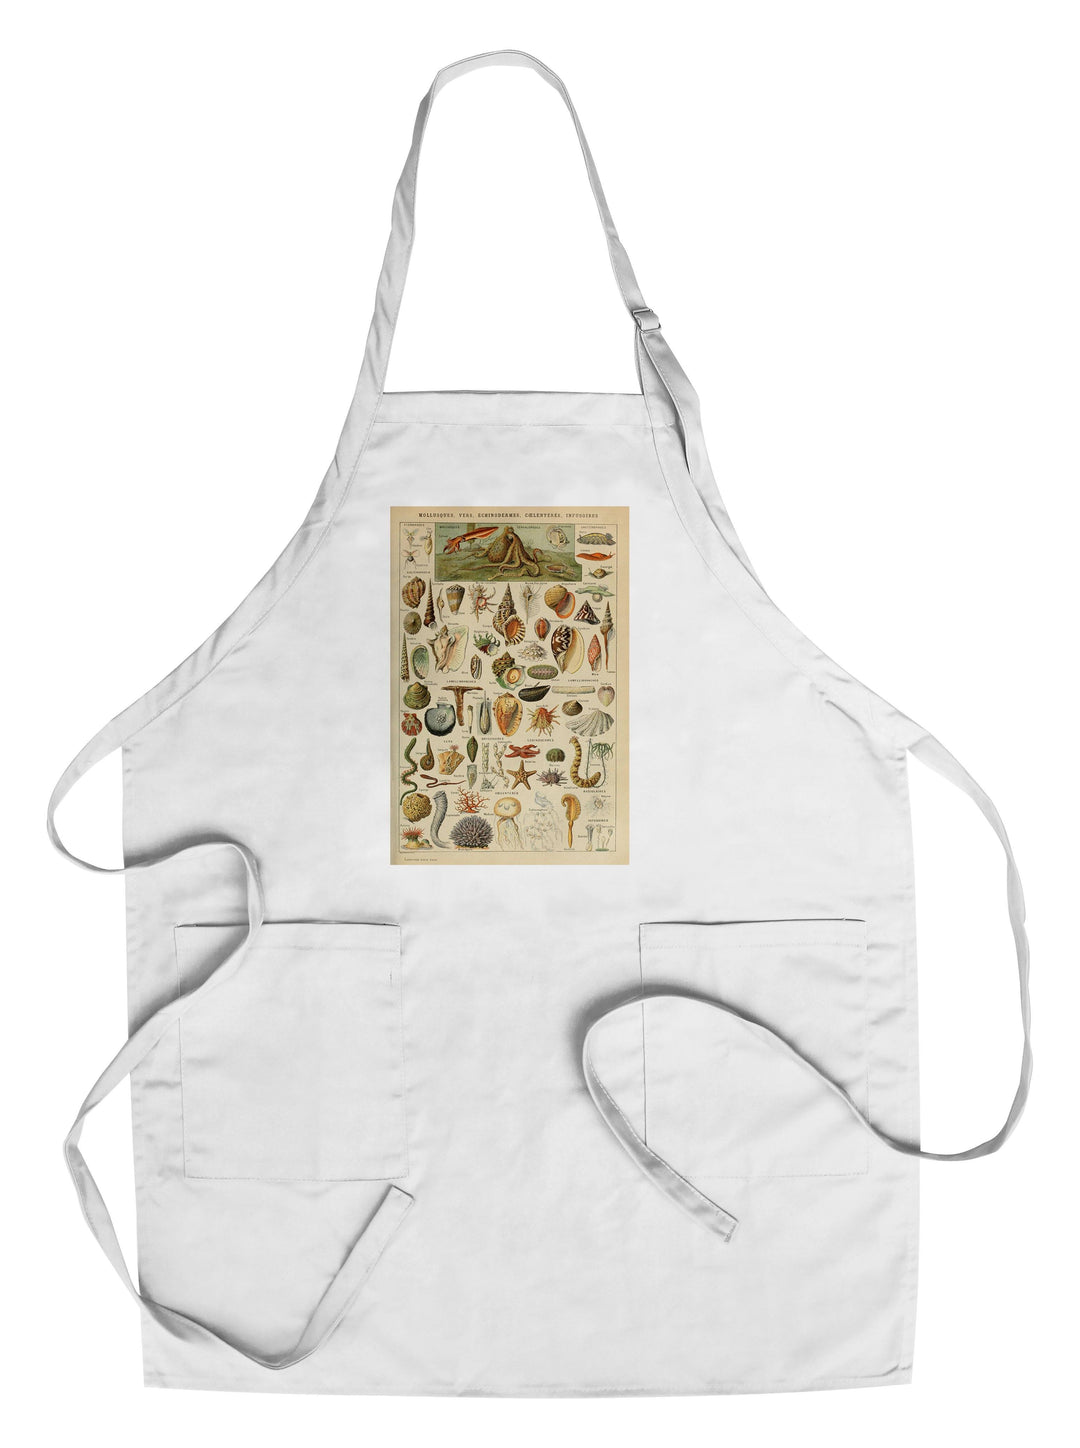 Assorted Shells, B, Vintage Bookplate, Adolphe Millot Artwork, Towels and Aprons Kitchen Lantern Press 